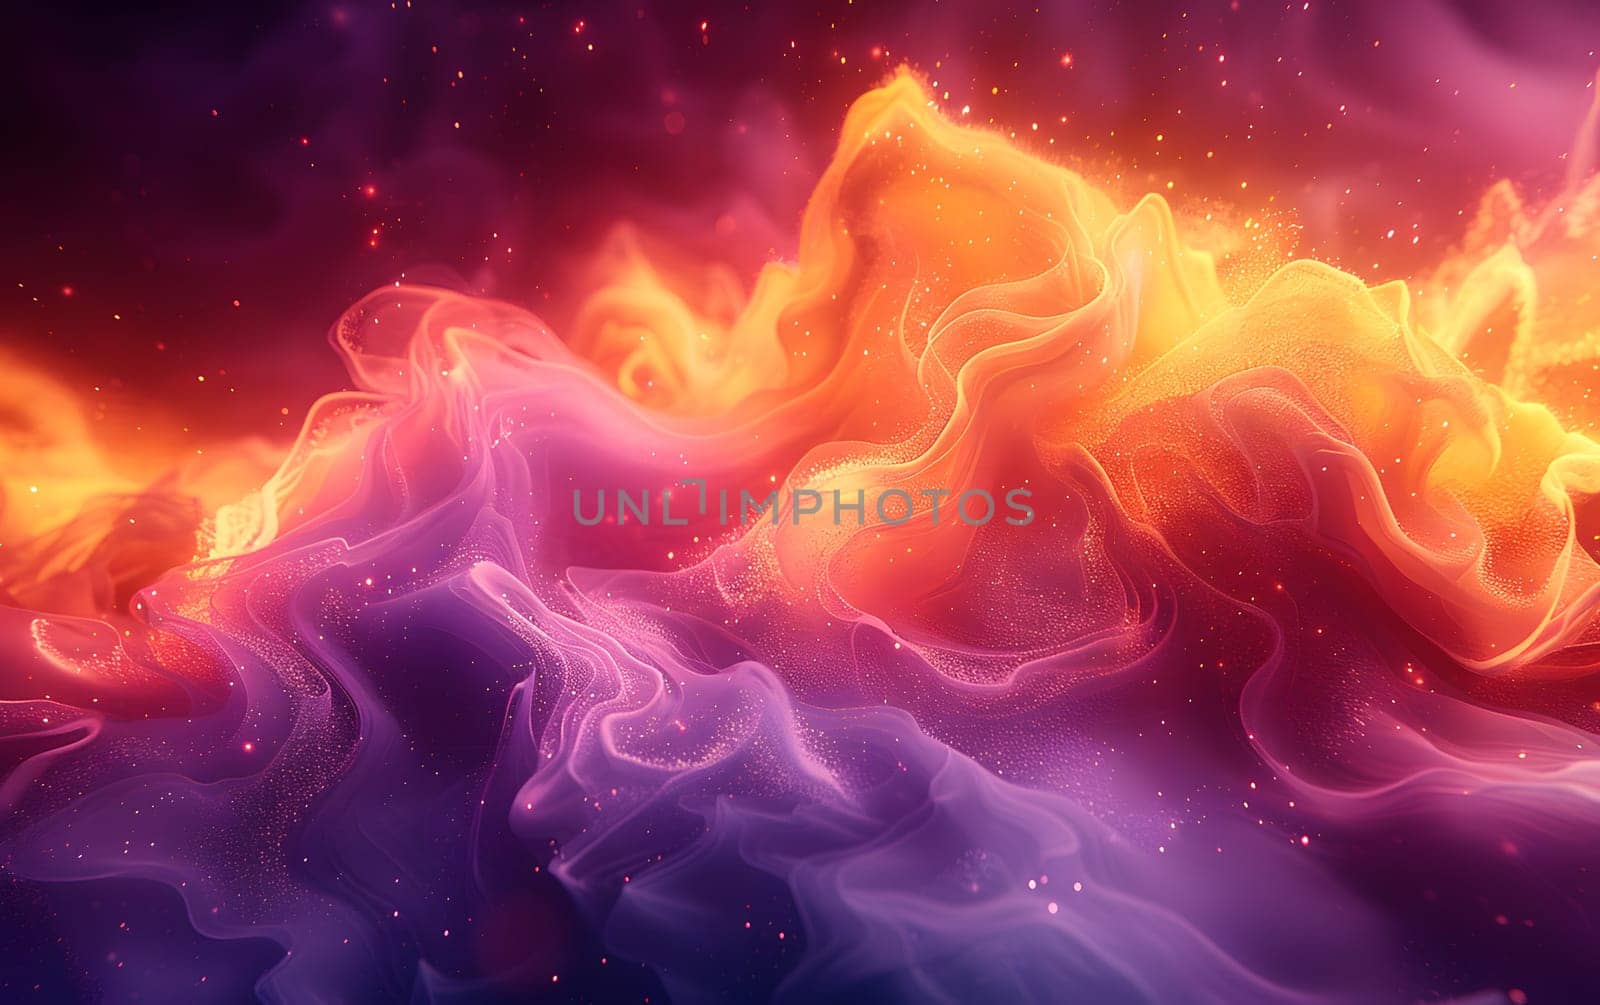 The painting depicts a galaxy with fiery purple flames and smoke billowing out of it, creating a mesmerizing display of heat and gas